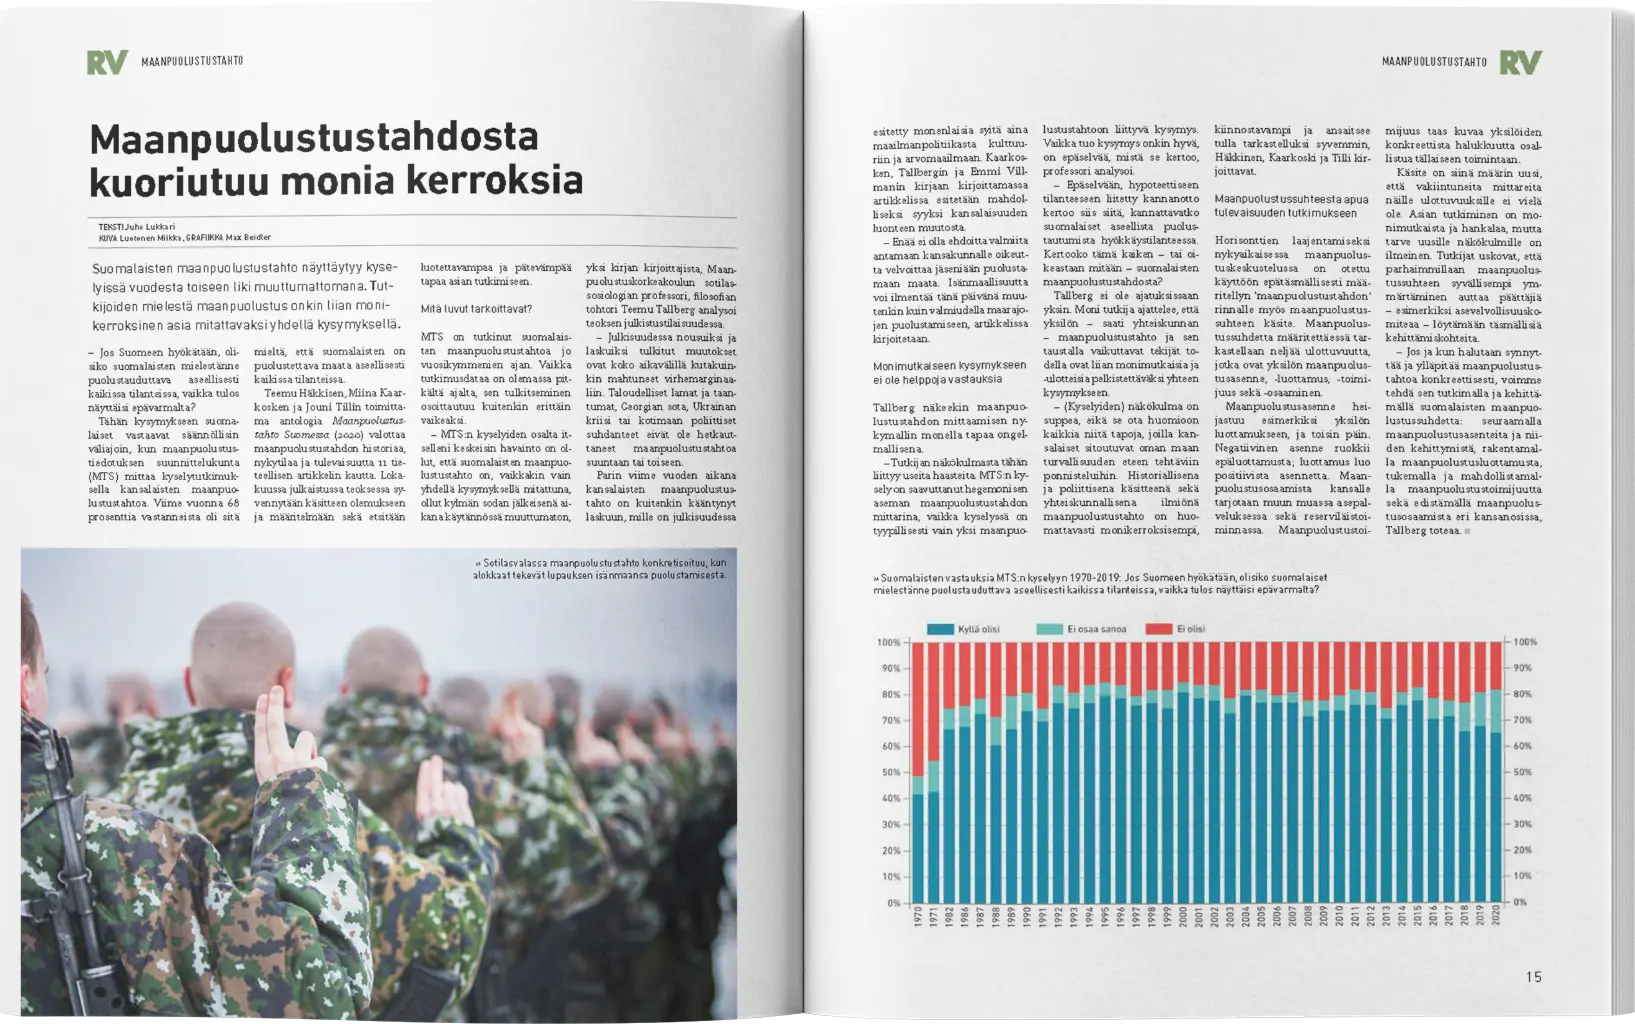 Spread from the 17/20 issue of the Ruotuväki newspaper.